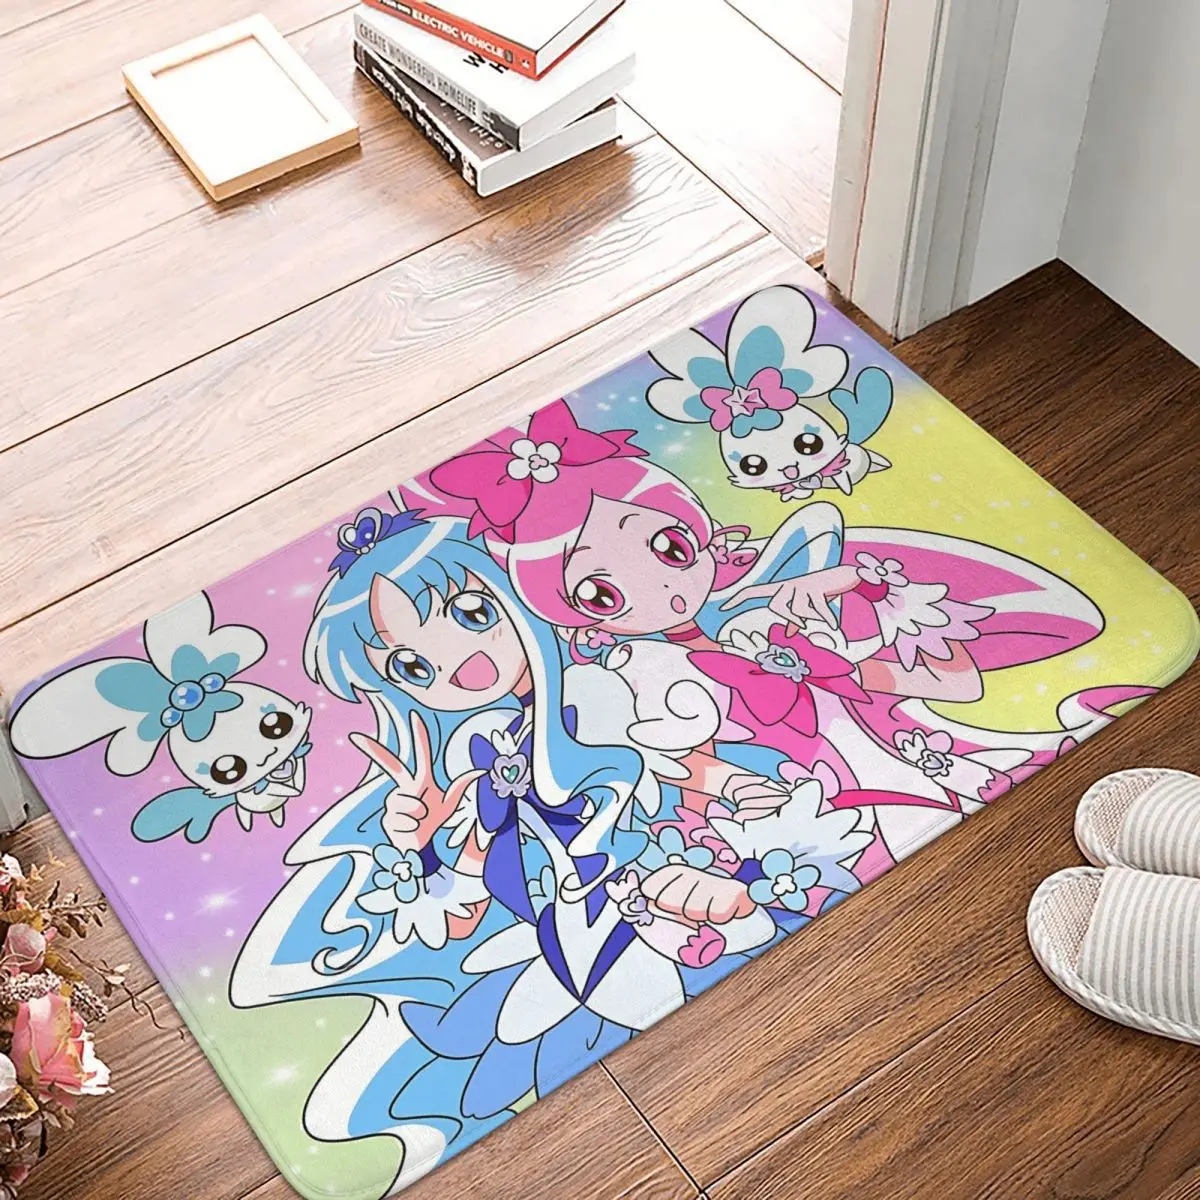 

Pretty Cure Precure Princess Anime Non-Slip Carpet Heartcatch And Fairies Doormat Living Room Kitchen Mat Welcome Floor Rug